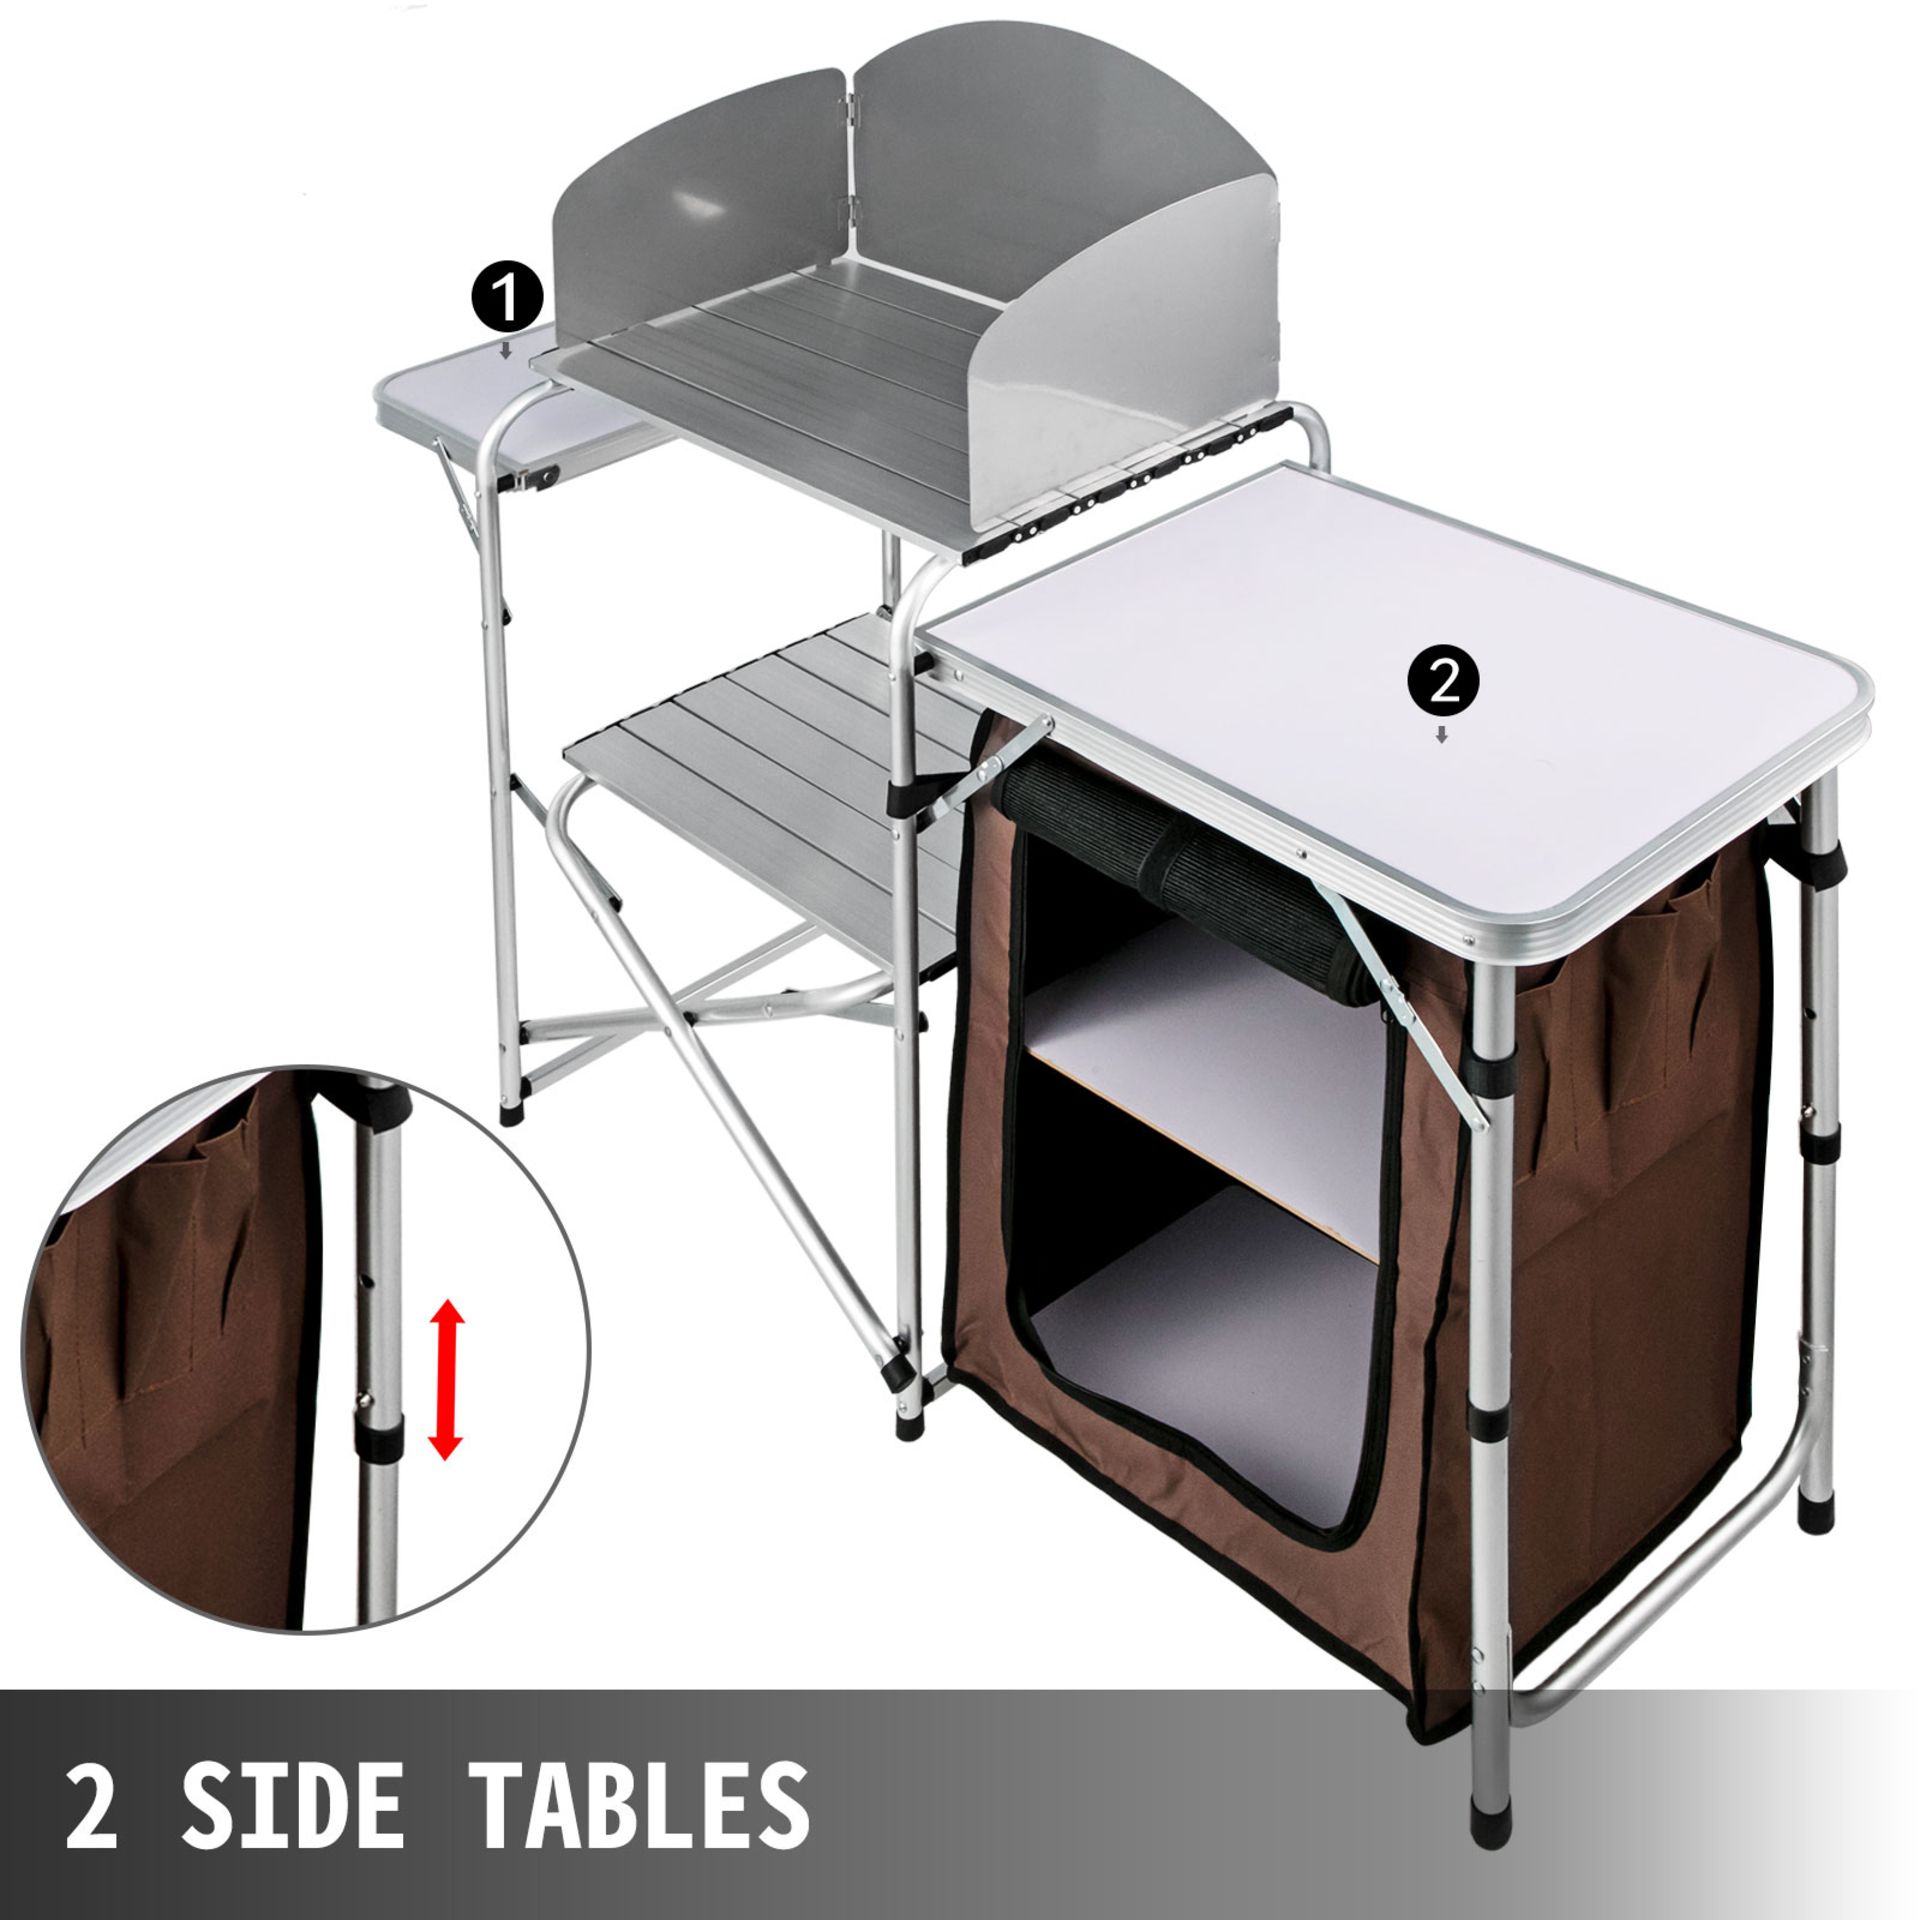 PORTABLE OUTDOOR COLLAPSIBLE KITCHEN PREP TABLE (NEW) (MSRP $225) - Image 4 of 5